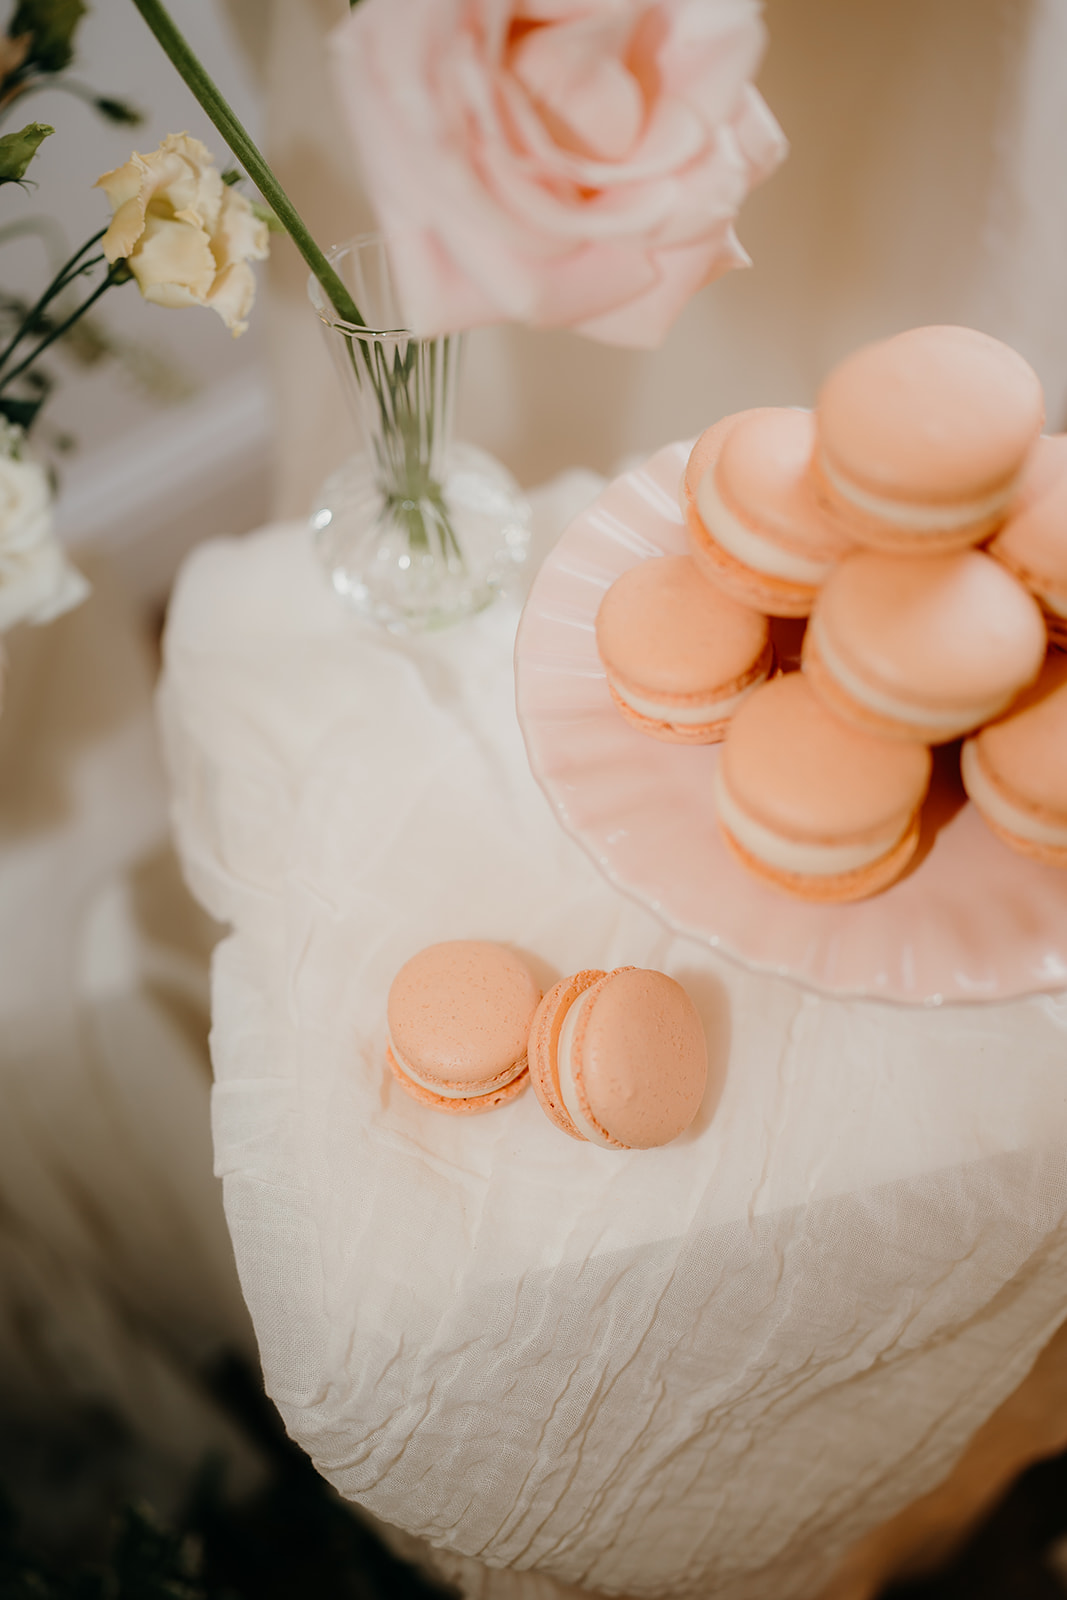 Details of the macaroons